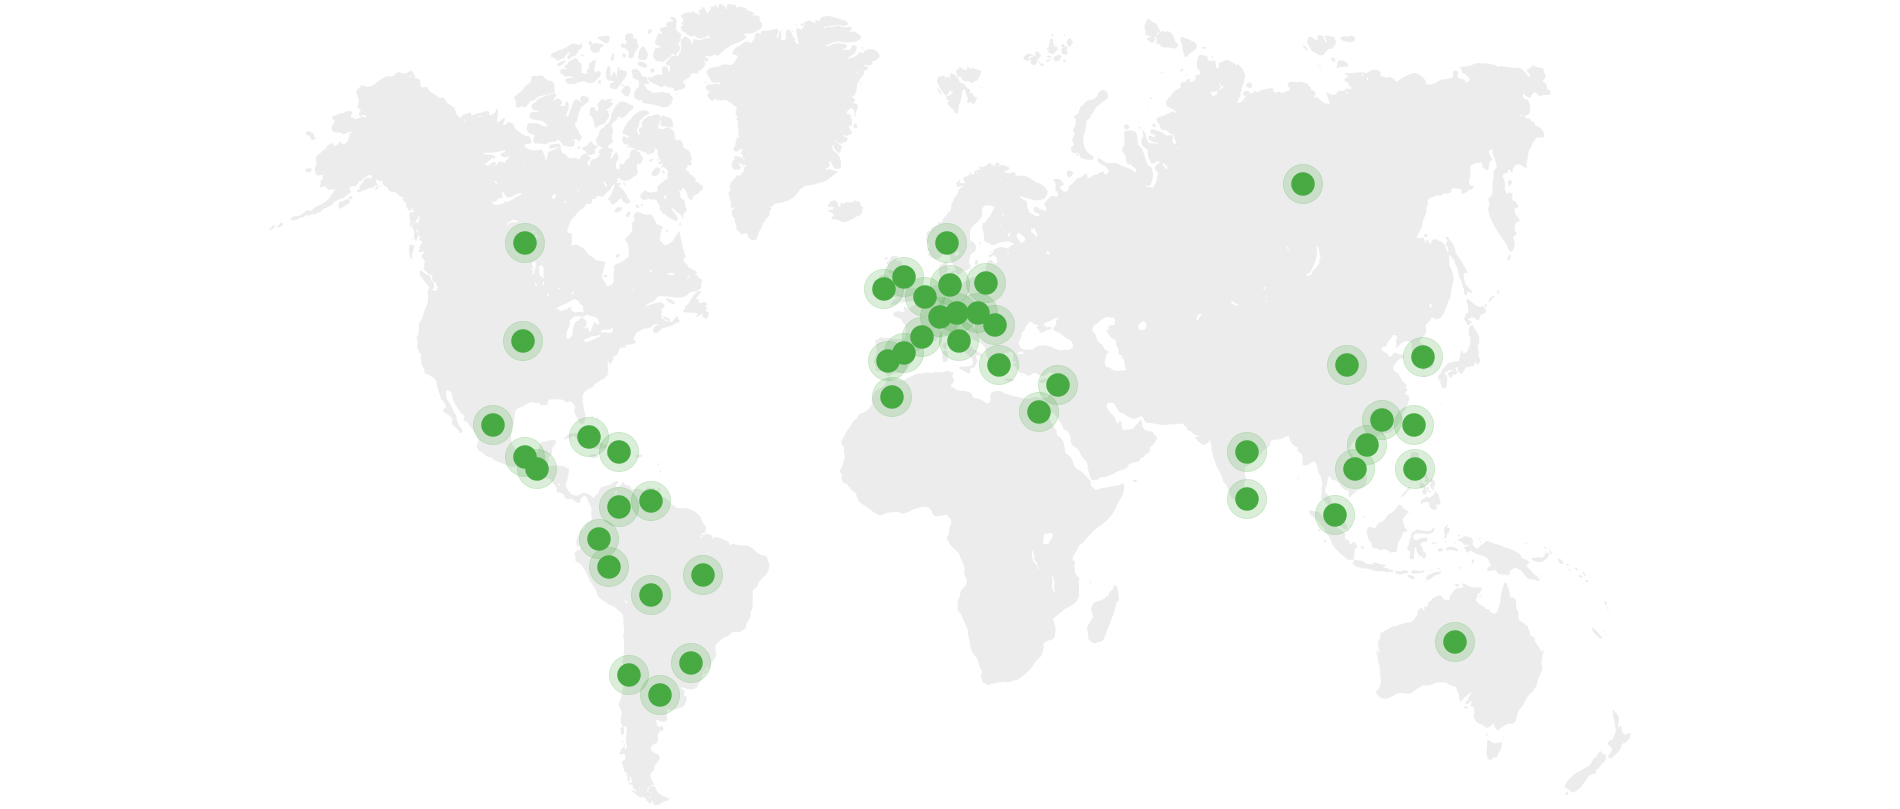 Simprint - Doing business in over 45 countries wordwide...